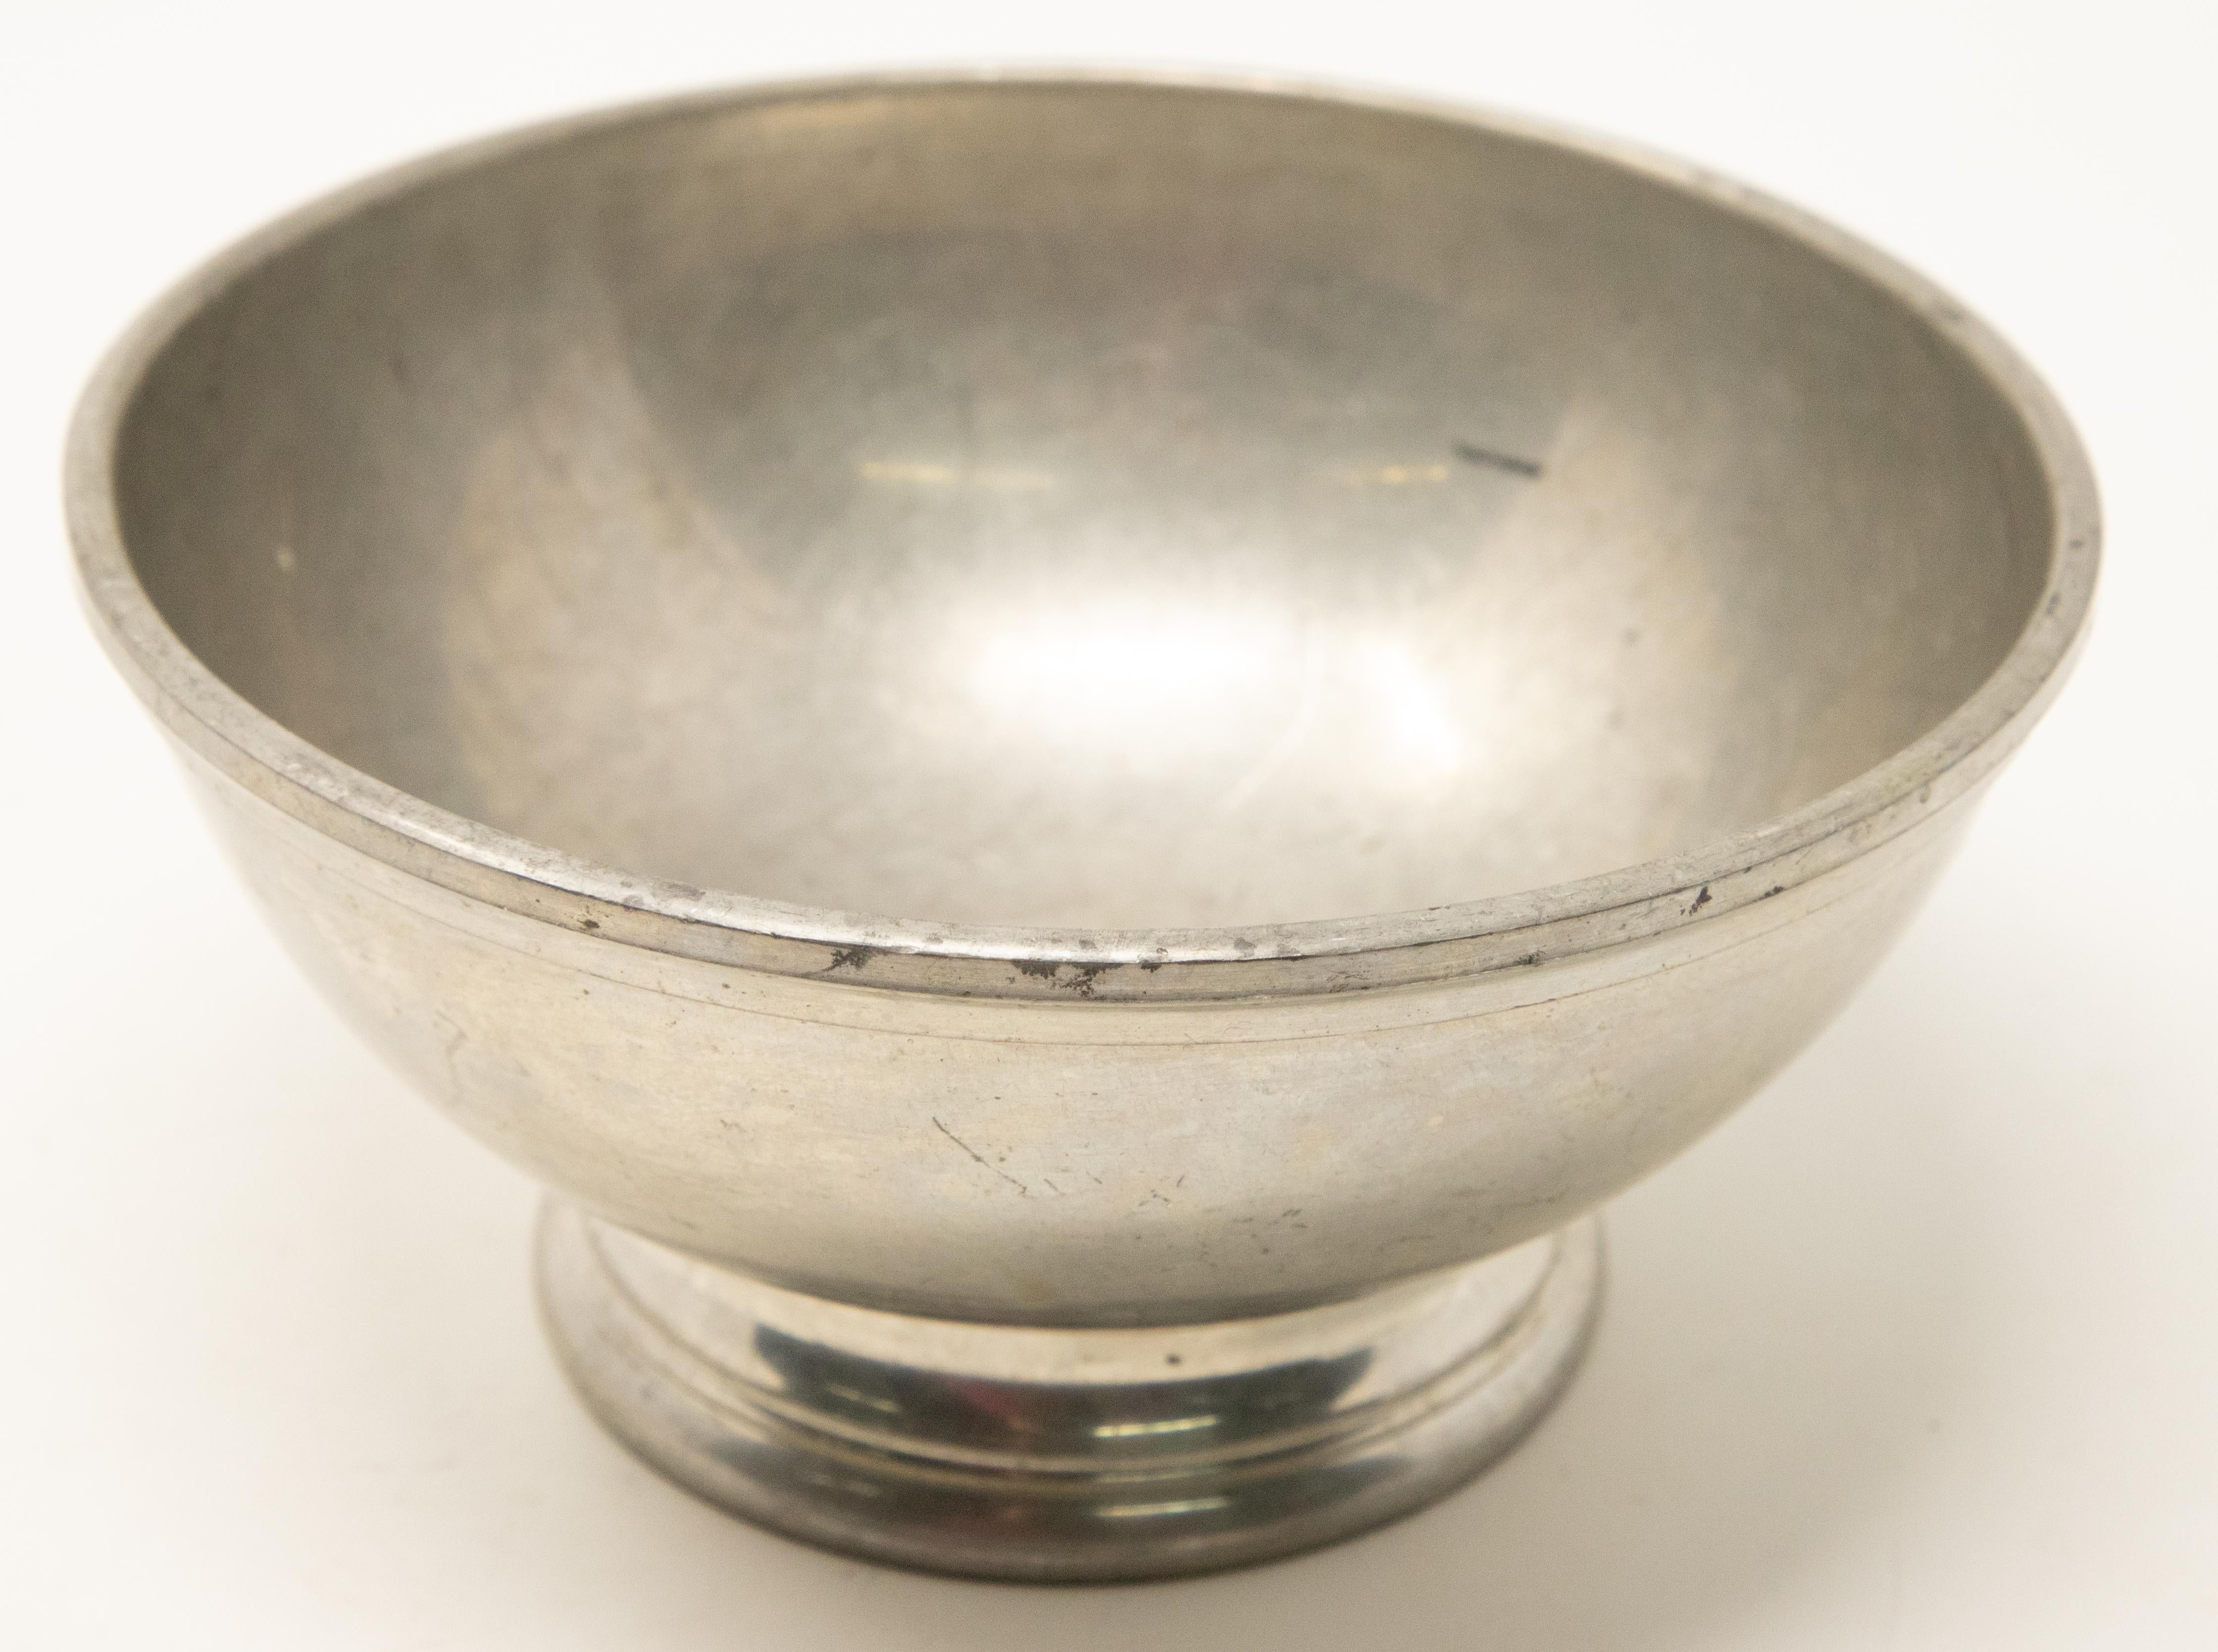 Williamsburg Stieff Pewter Bowl In Fair Condition For Sale In Cookeville, TN